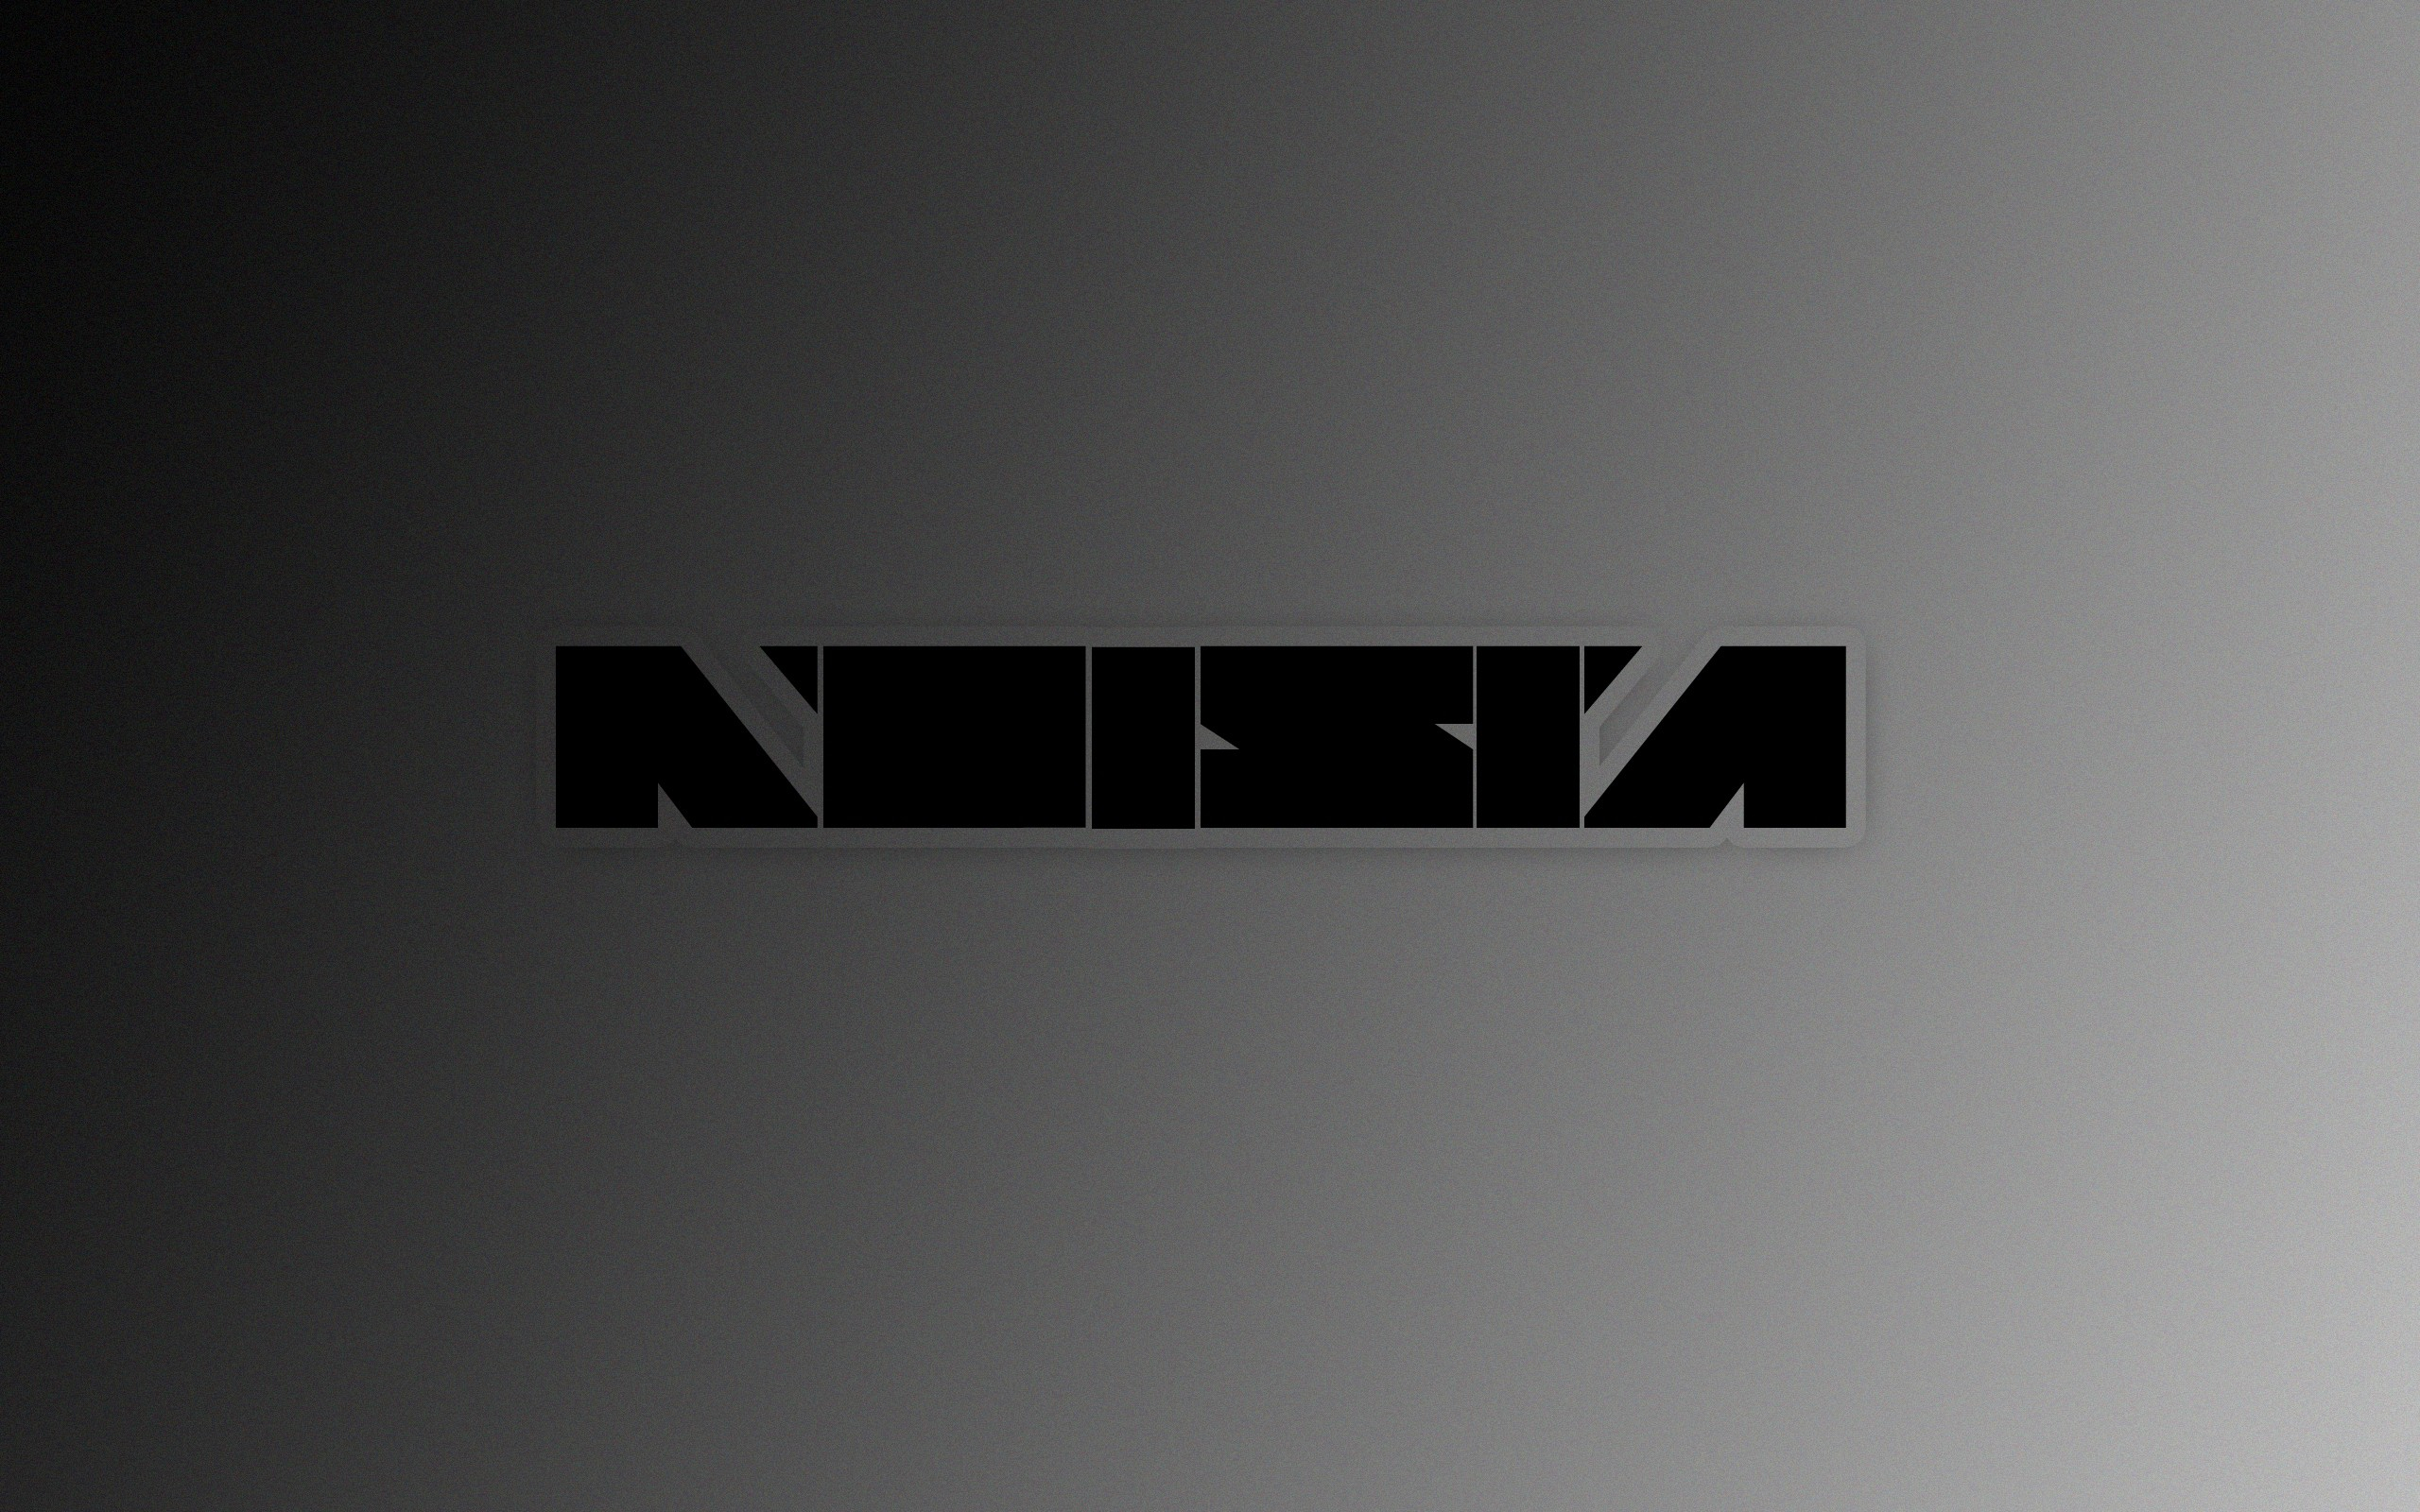 2560x1600 Drums dubstep Noisia drum and bass wallpaper | | 59756 |